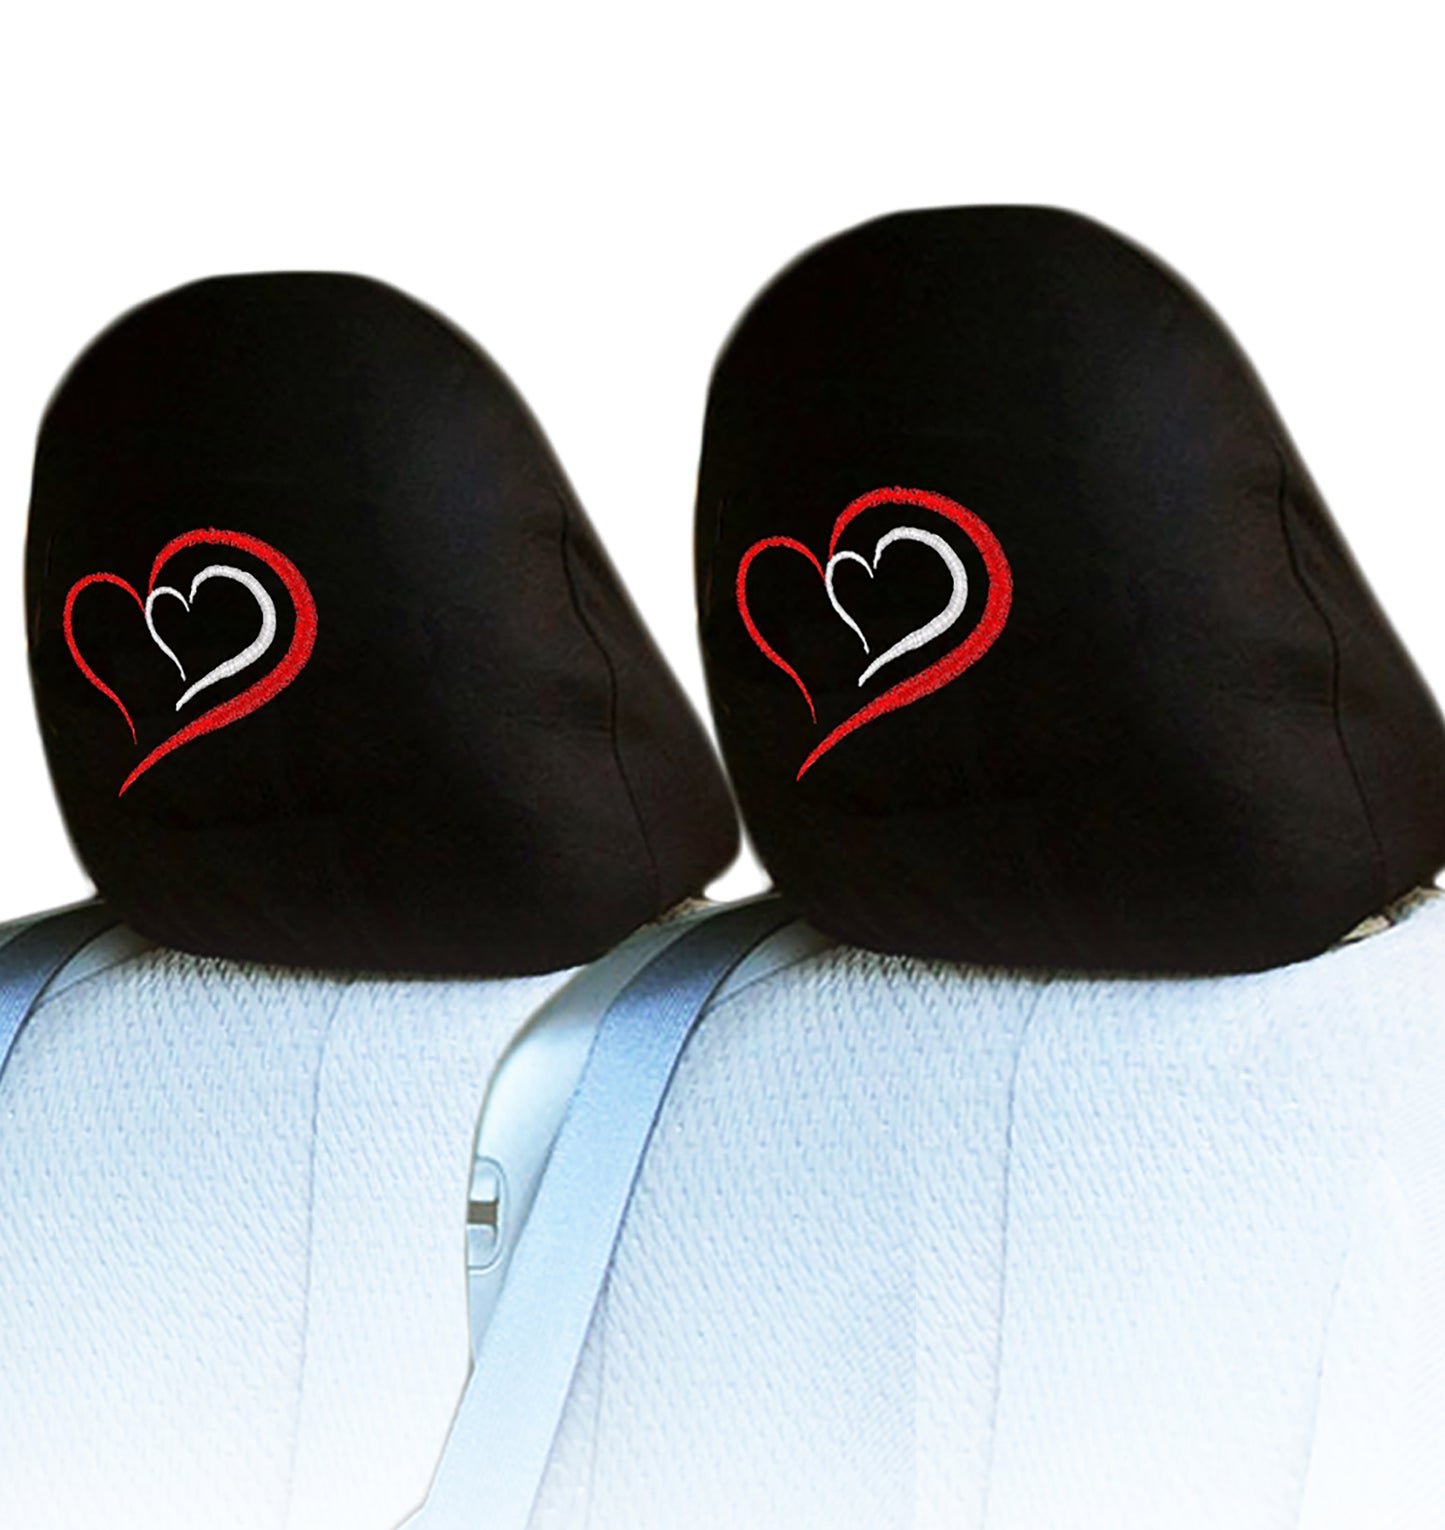 Car headrest covers with red and white heart design